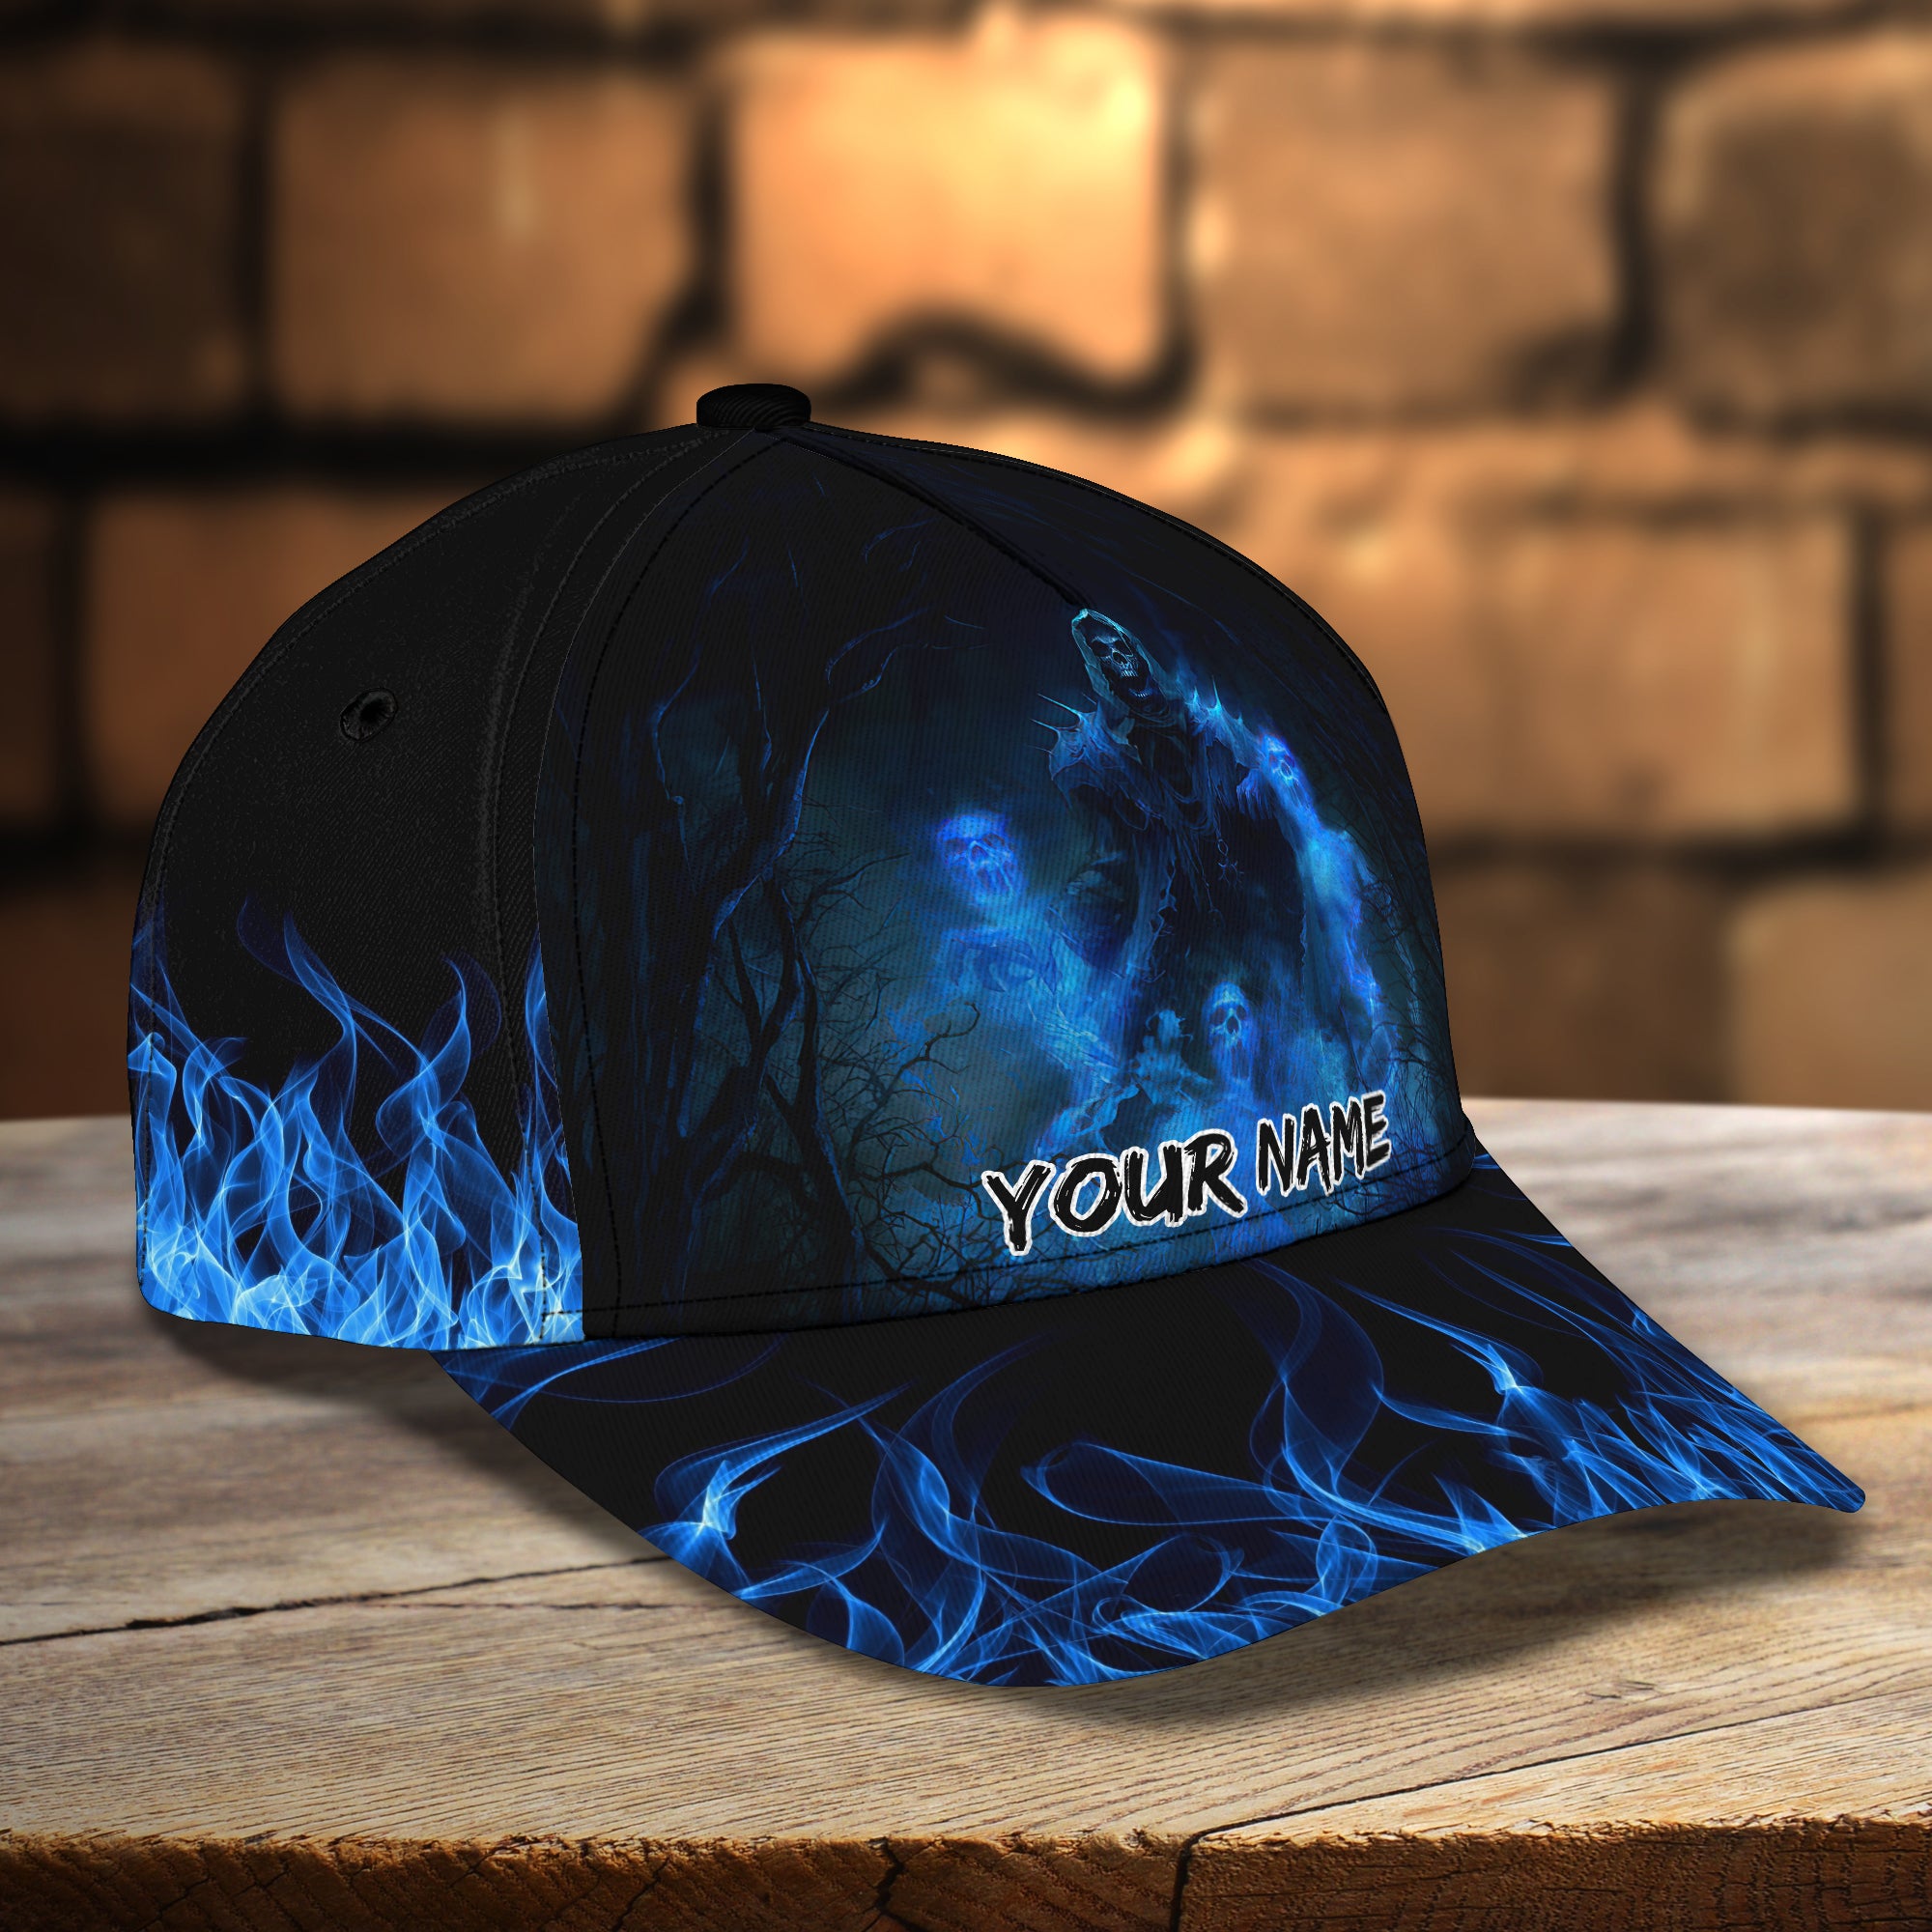 God Of Death - Personalized Name Cap - Urt96